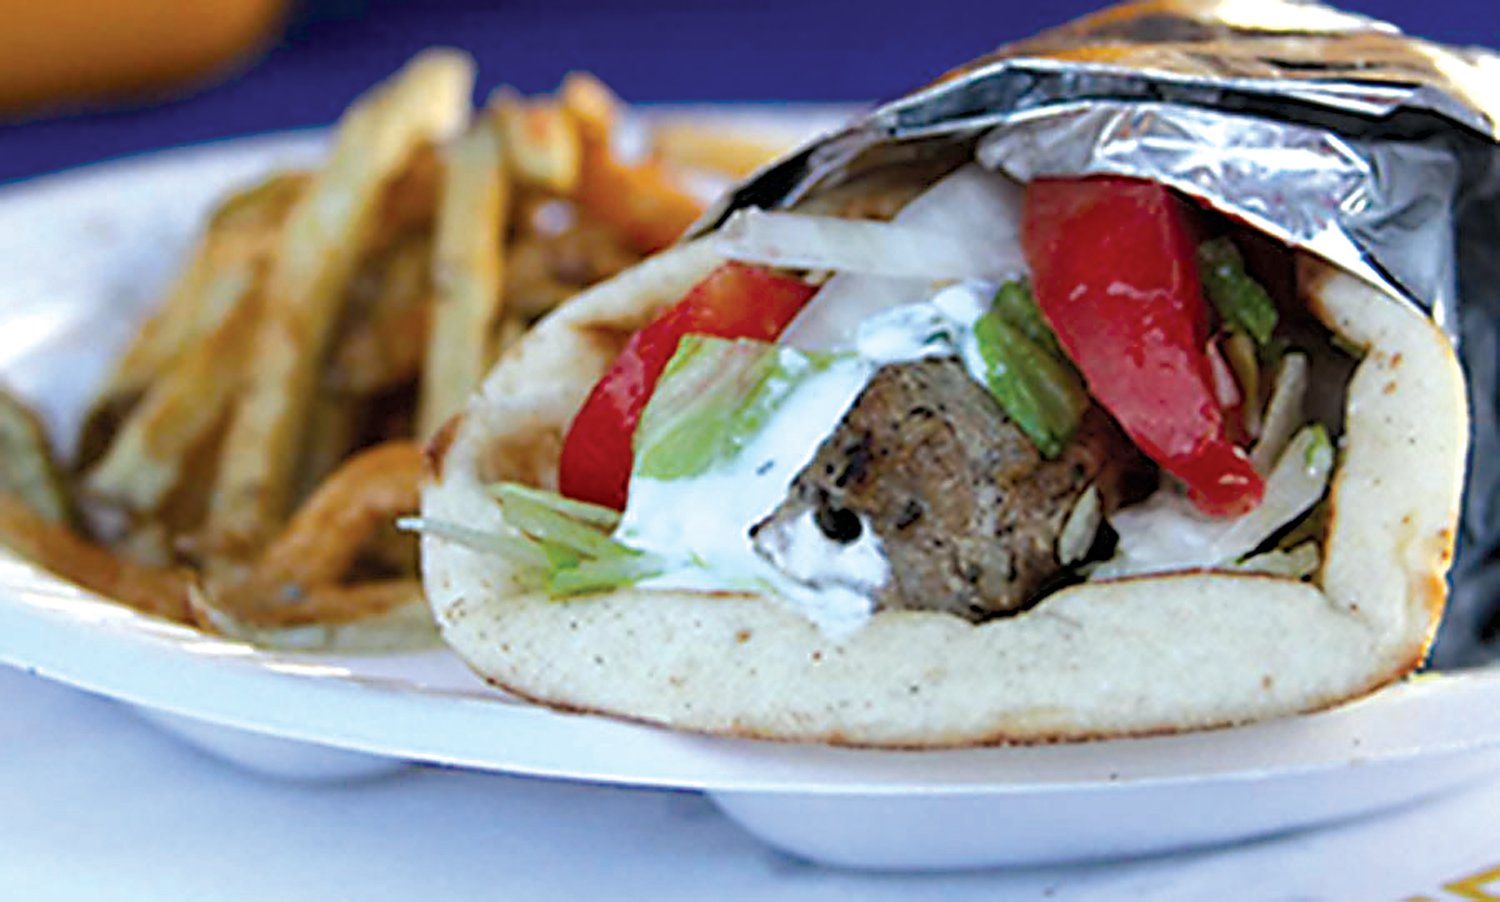 The familiar Greek gyro sandwich is always a crowd favorite. It will be served with fries at the festival.